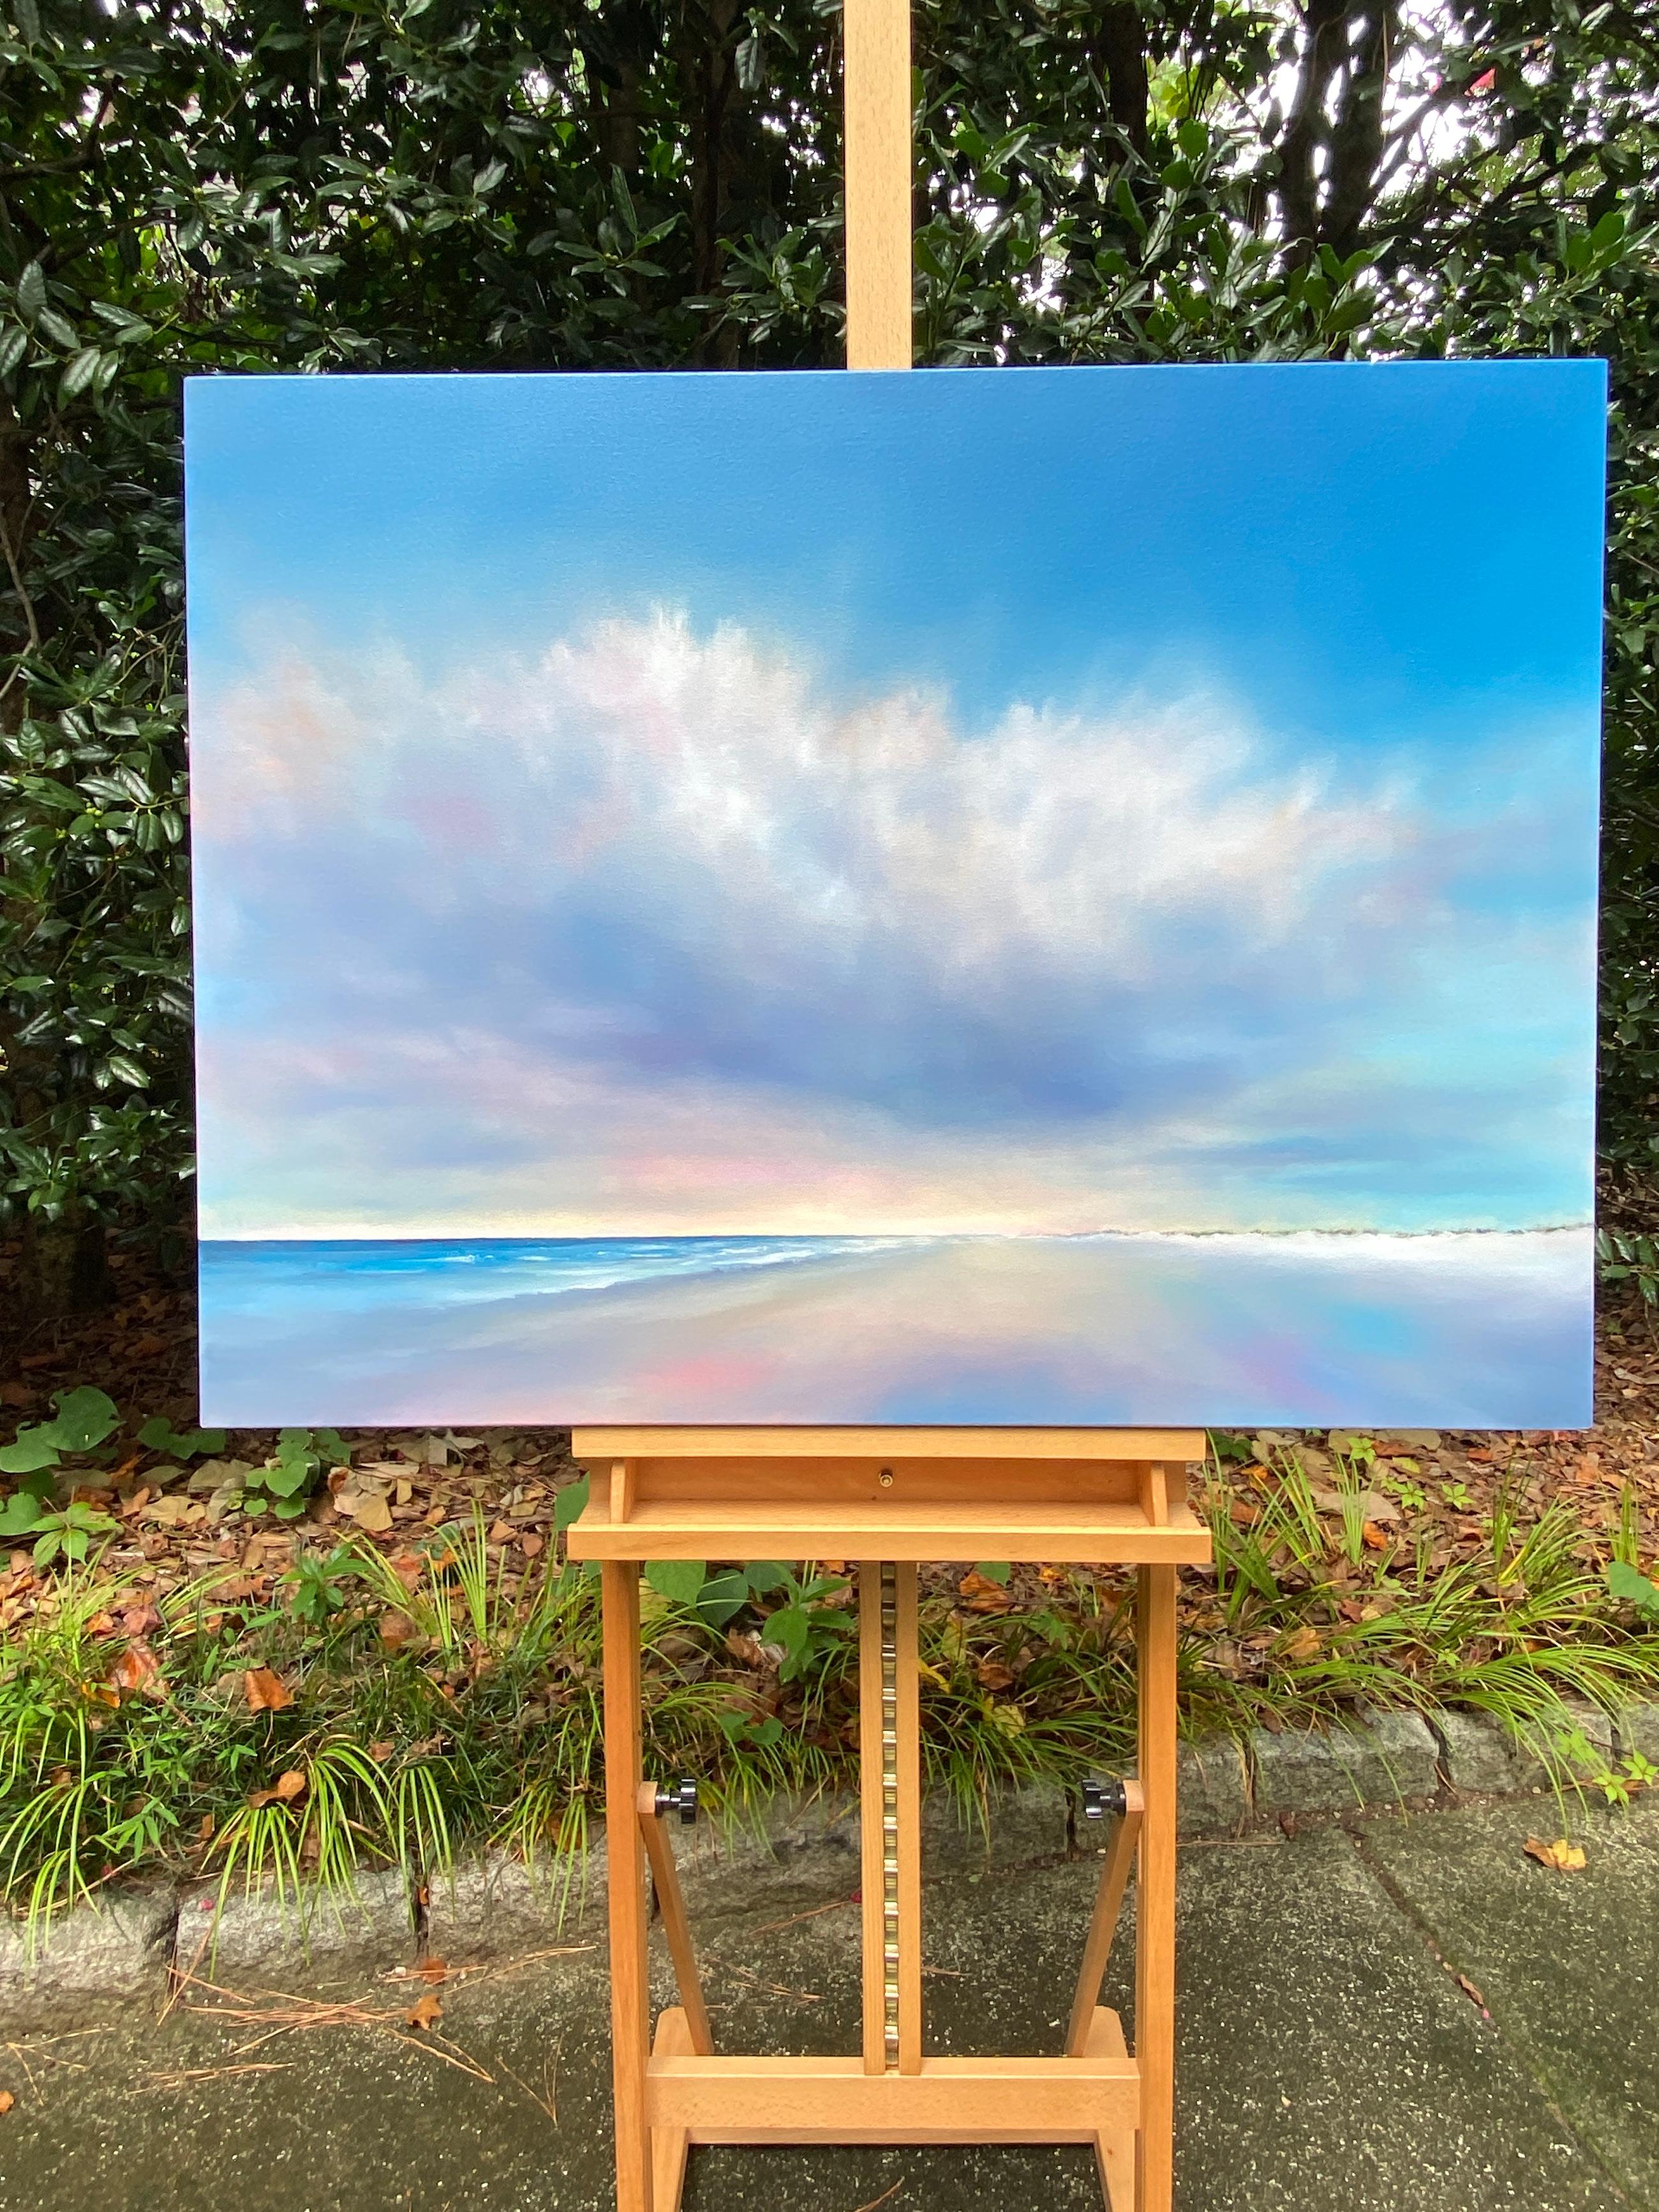 <p>Artist Comments<br />A serene seascape with a glowing cloud delicately hovers over the tranquil shore. Artist Nancy Hughes Miller uses a variety of pastel colors to express the sky, the sandy beach, and the water with soft light appearing on the